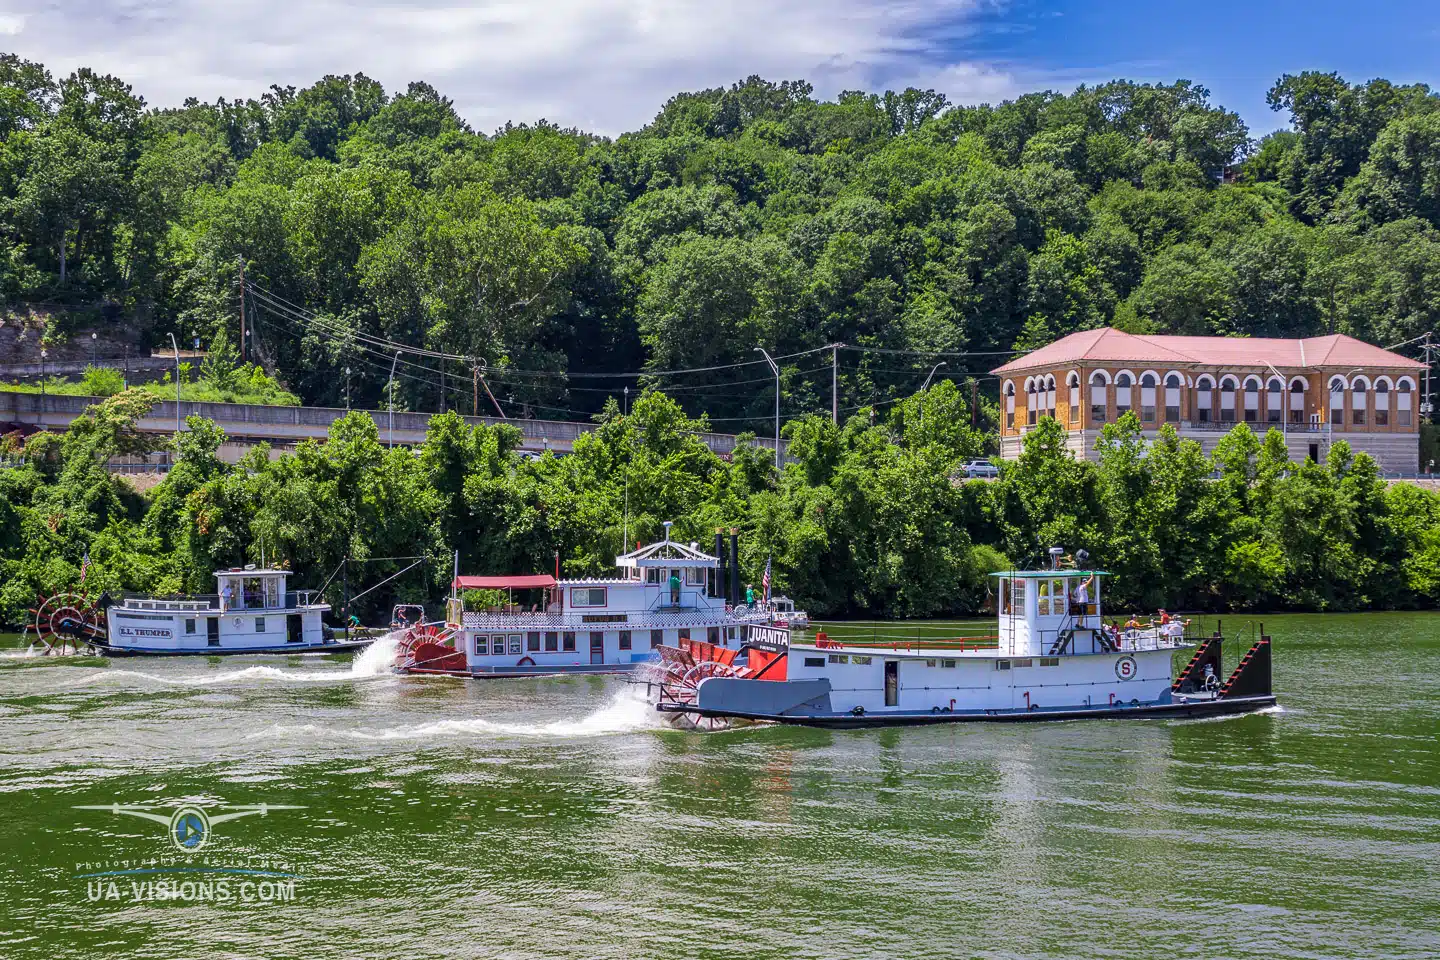 Several sternwheel boats in action during the 2022 Charleston Sternwheel Regatta boat race.